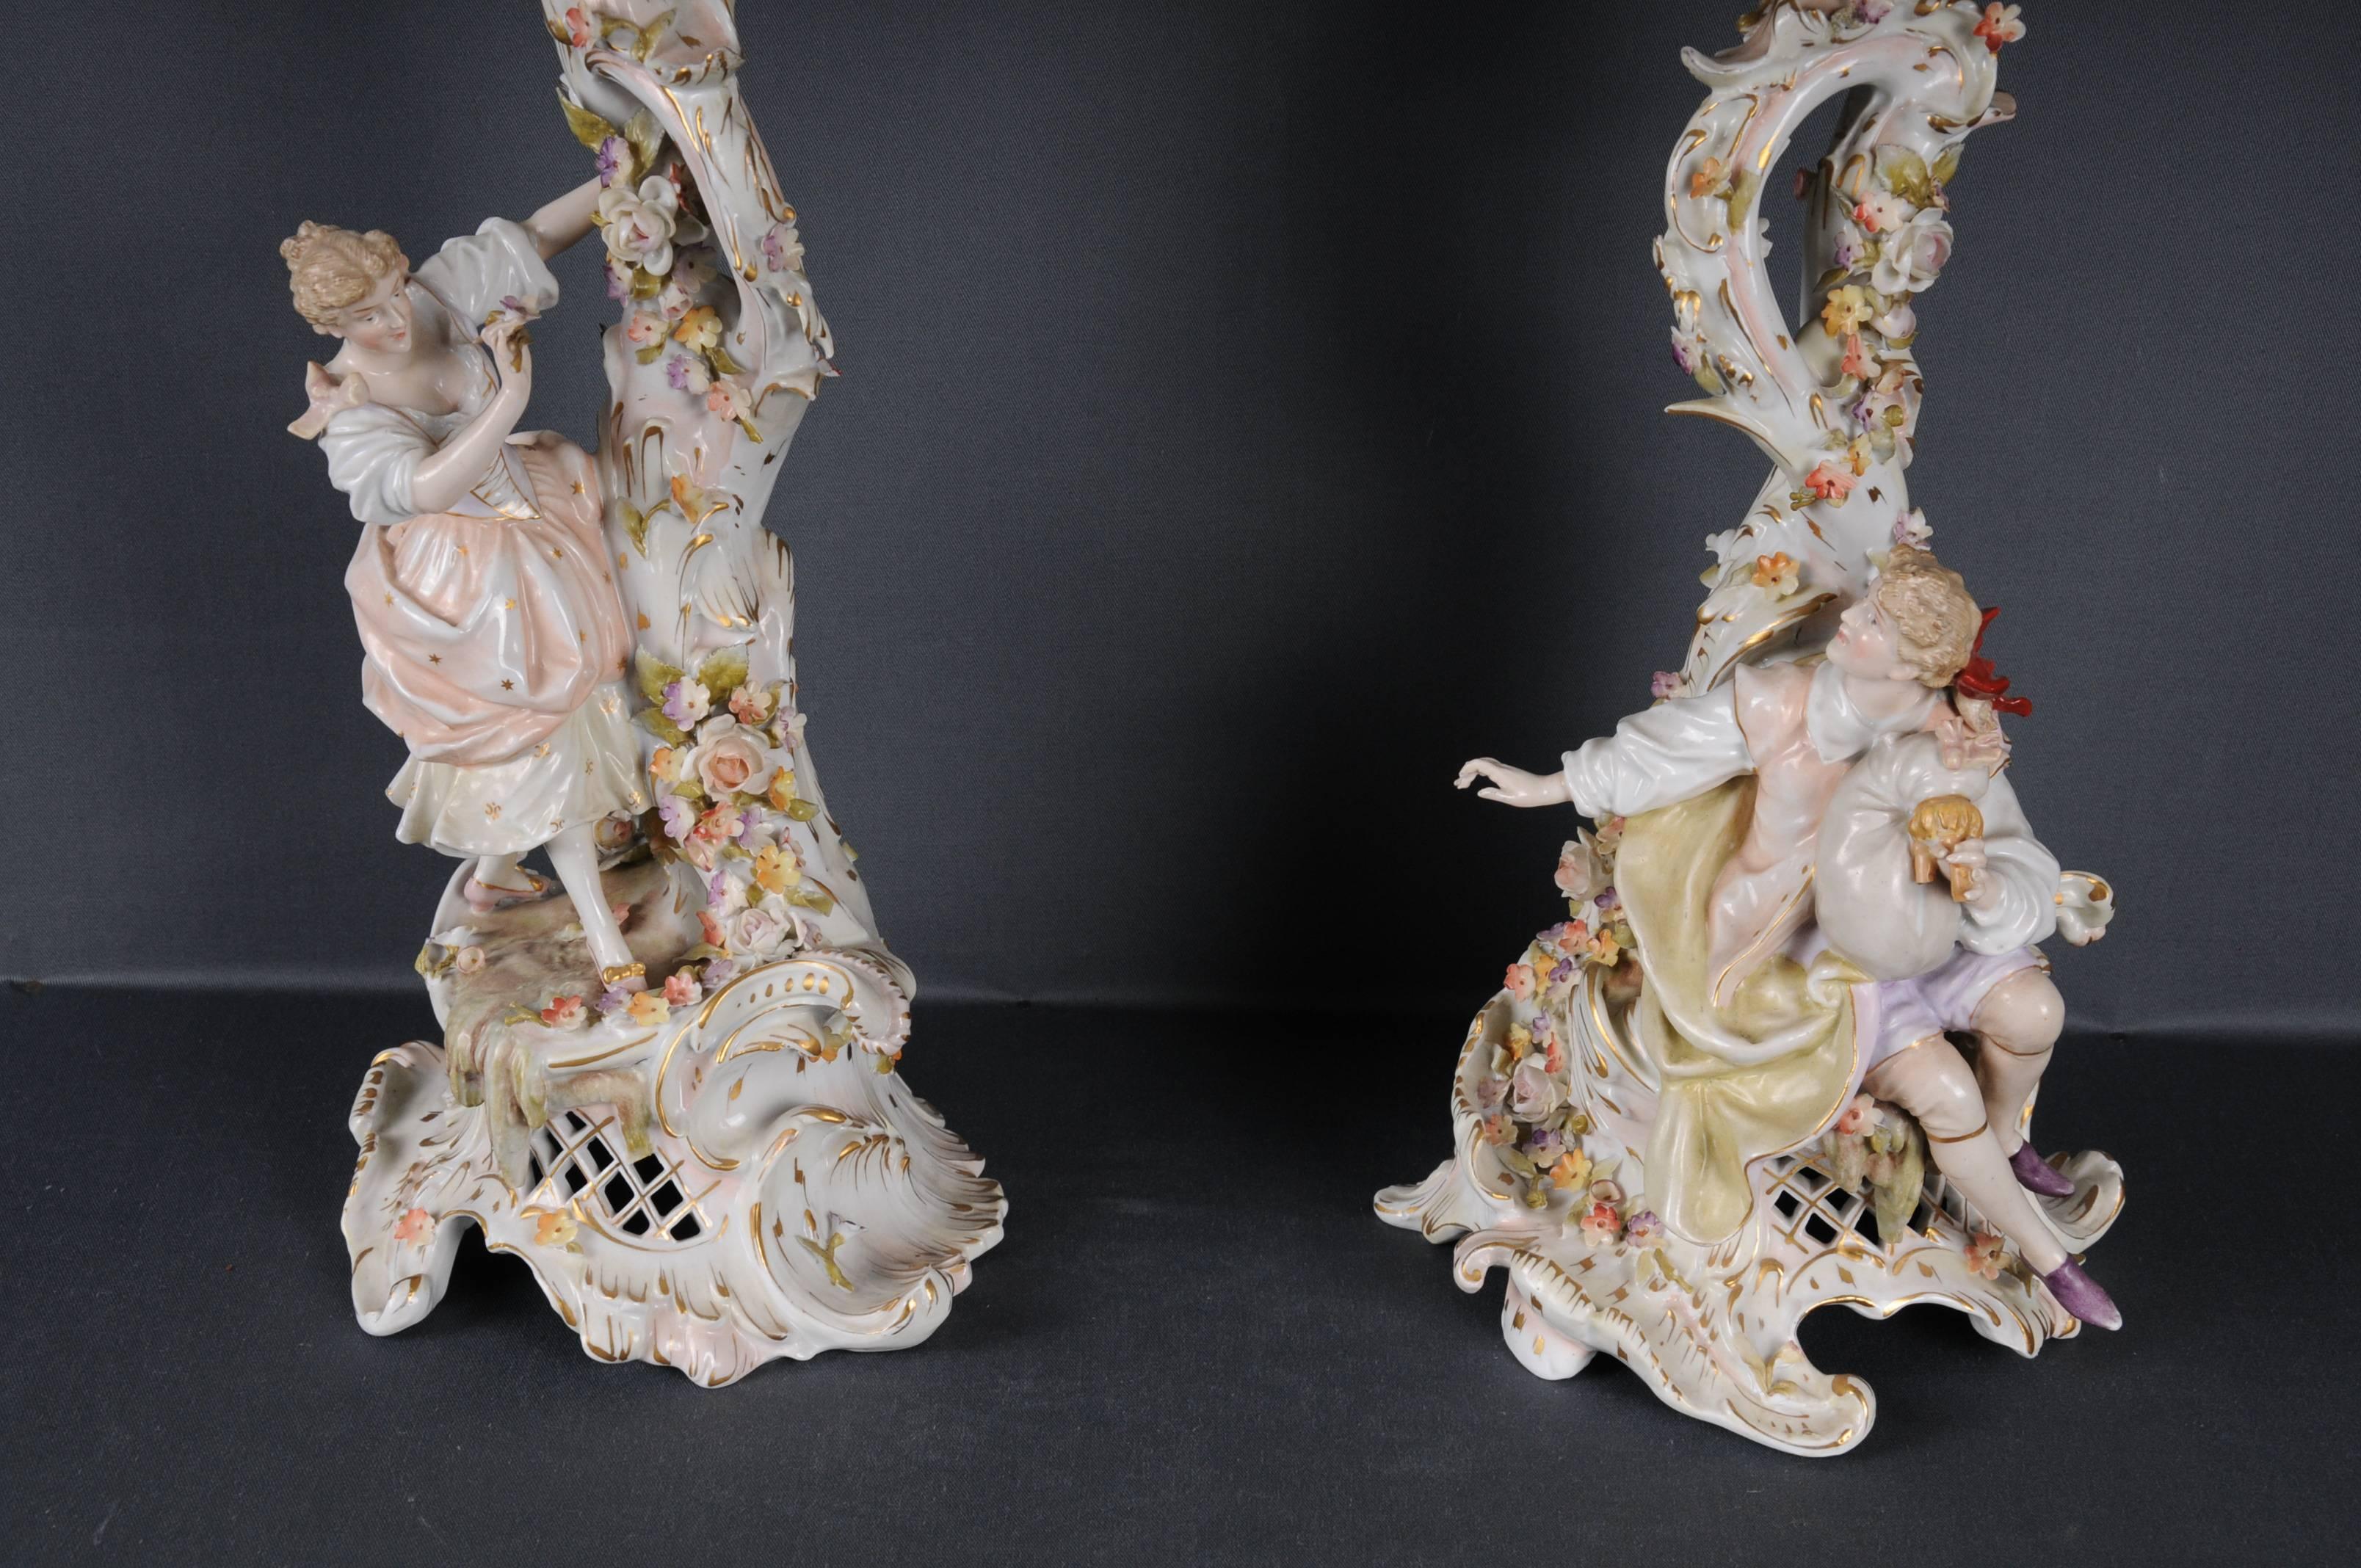 Pair of decorated porcelain chandeliers. Both chandeliers are richly decorated with plastic flowers and leaves.
The candle couple embodies a romantic love scene in the style of Rococo. Branch-shaped body with wide base. Rich gold staple. Each